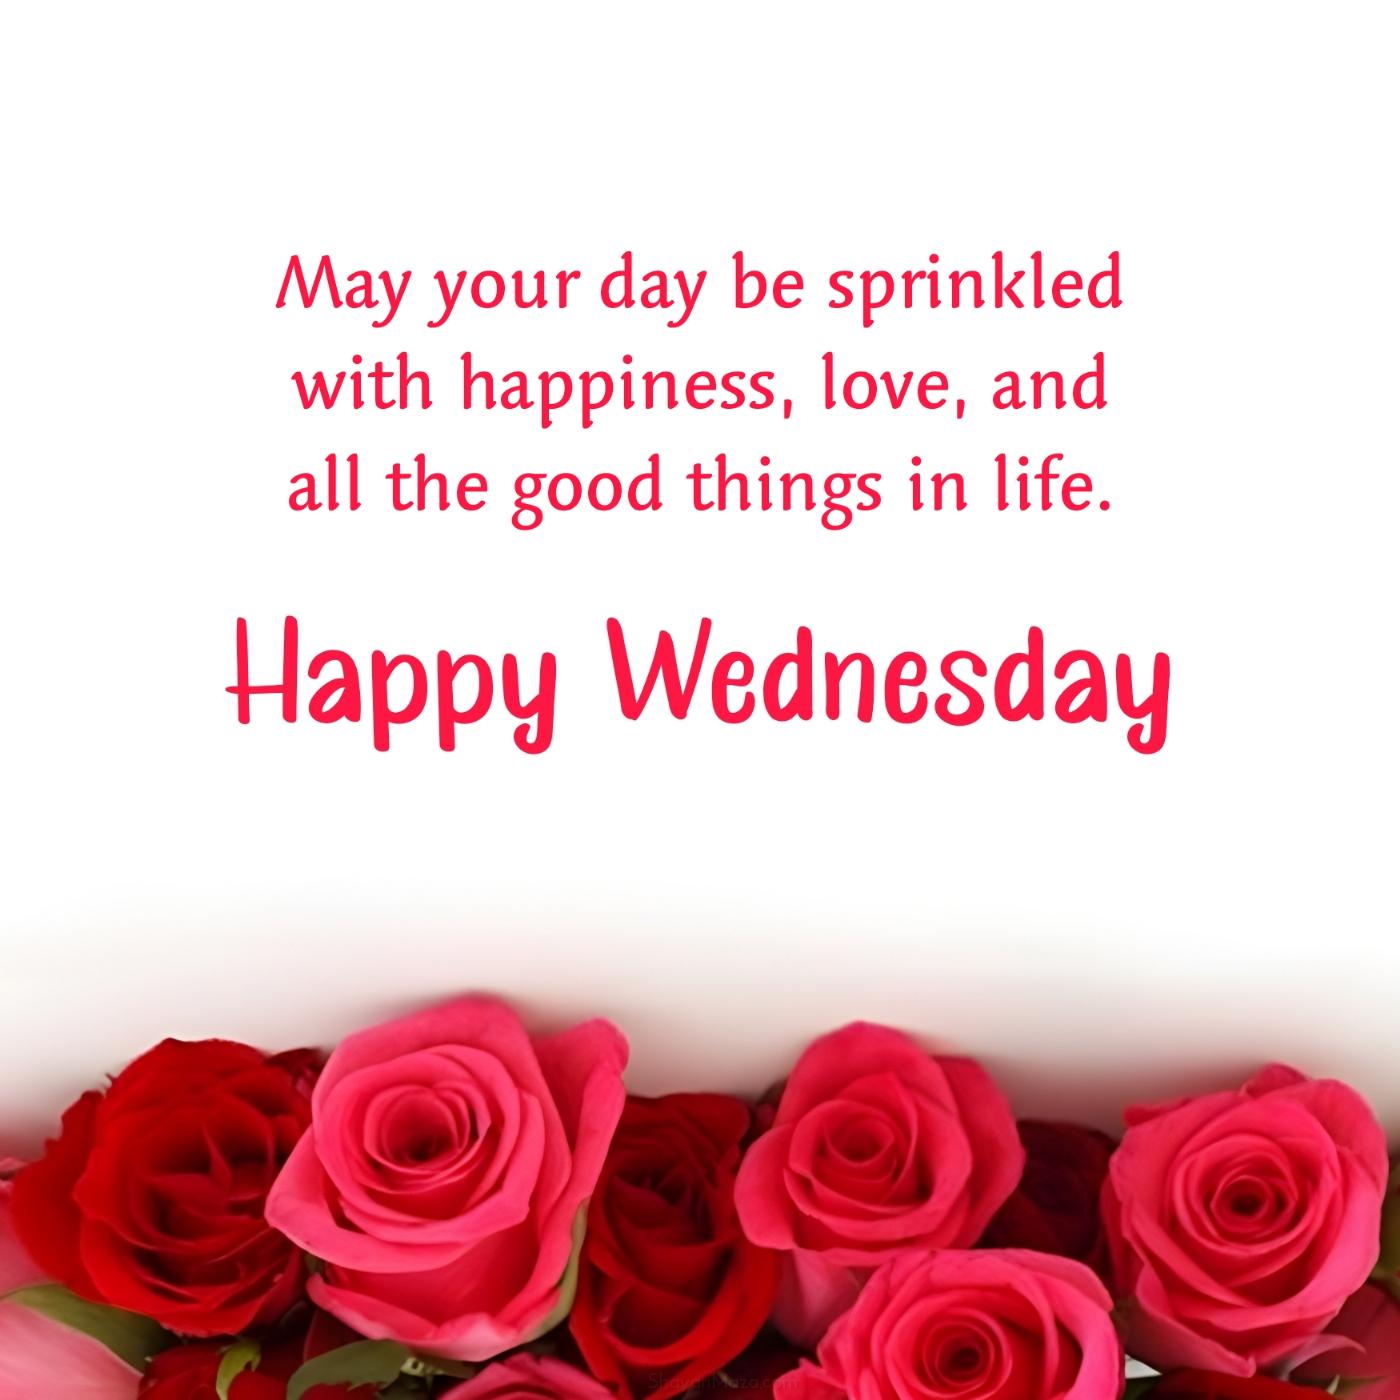 Happy Wednesday! May your day be sprinkled with happiness